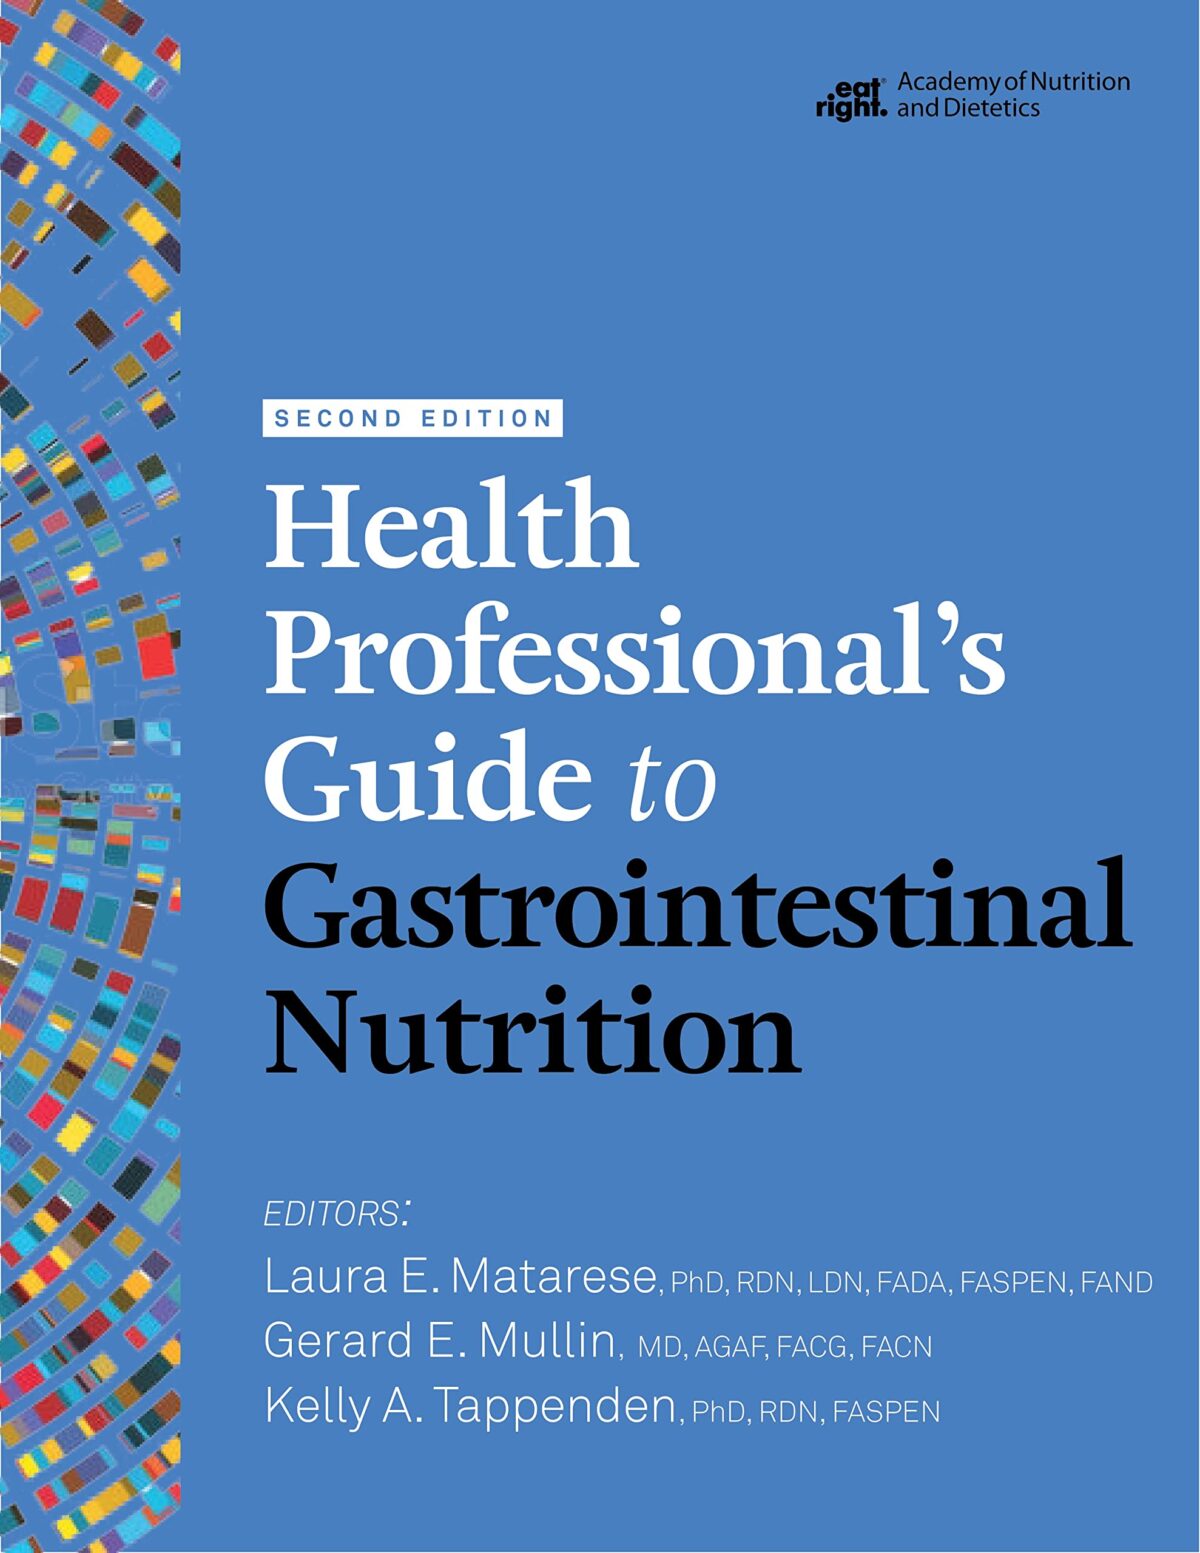 Health Professional’s Guide to Gastrointestinal Nutrition, 2nd Ed.